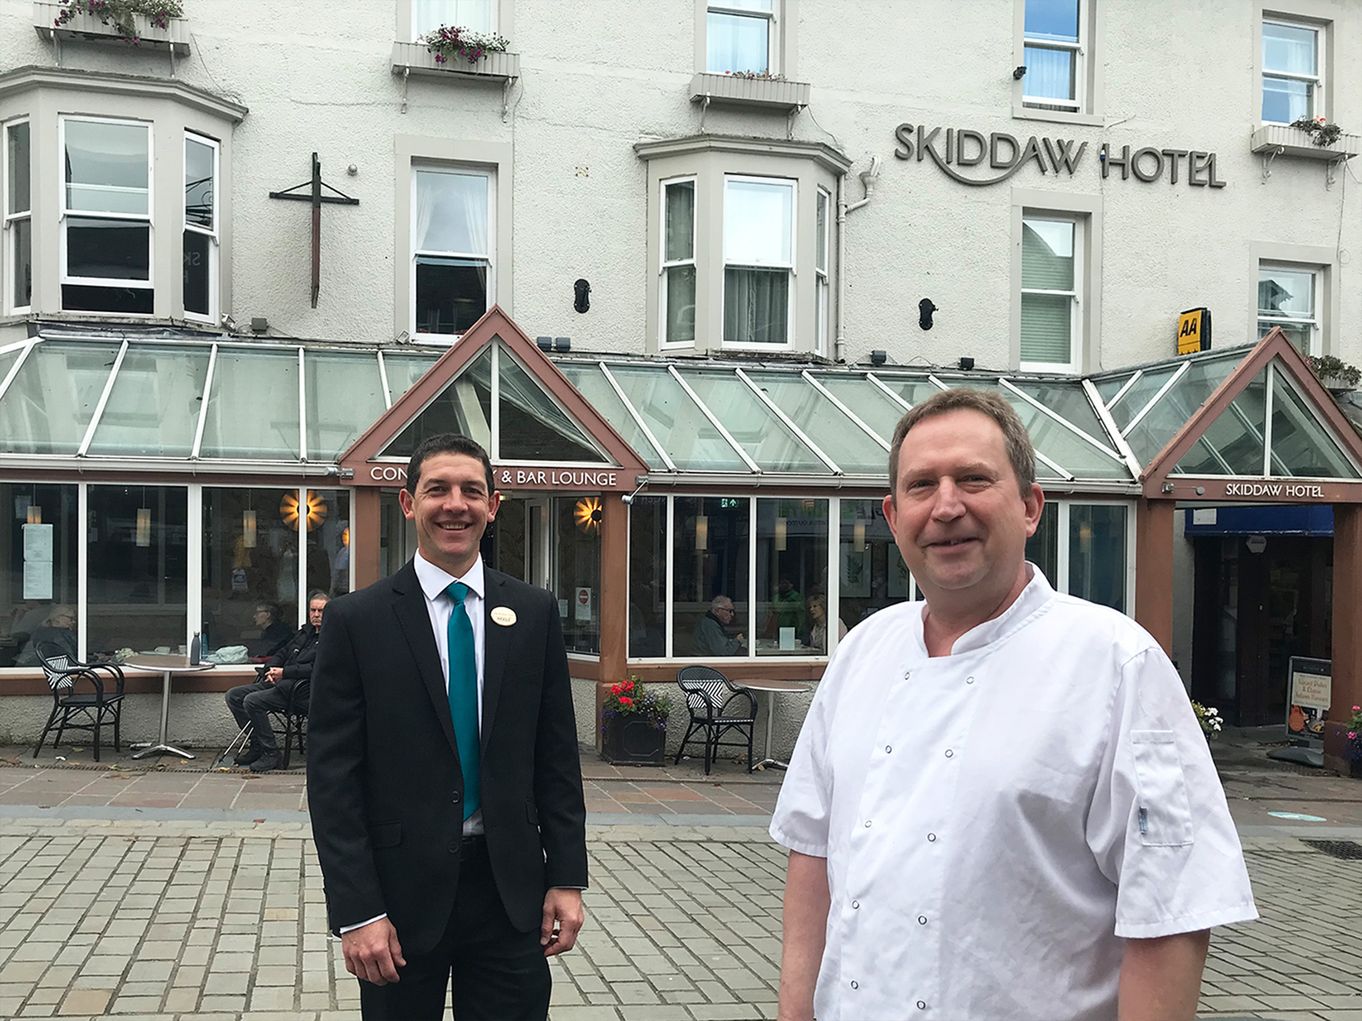 Neels Ferreira, General Manager at the Skiddaw Hotel and Bobby Fillingham, Head Chef